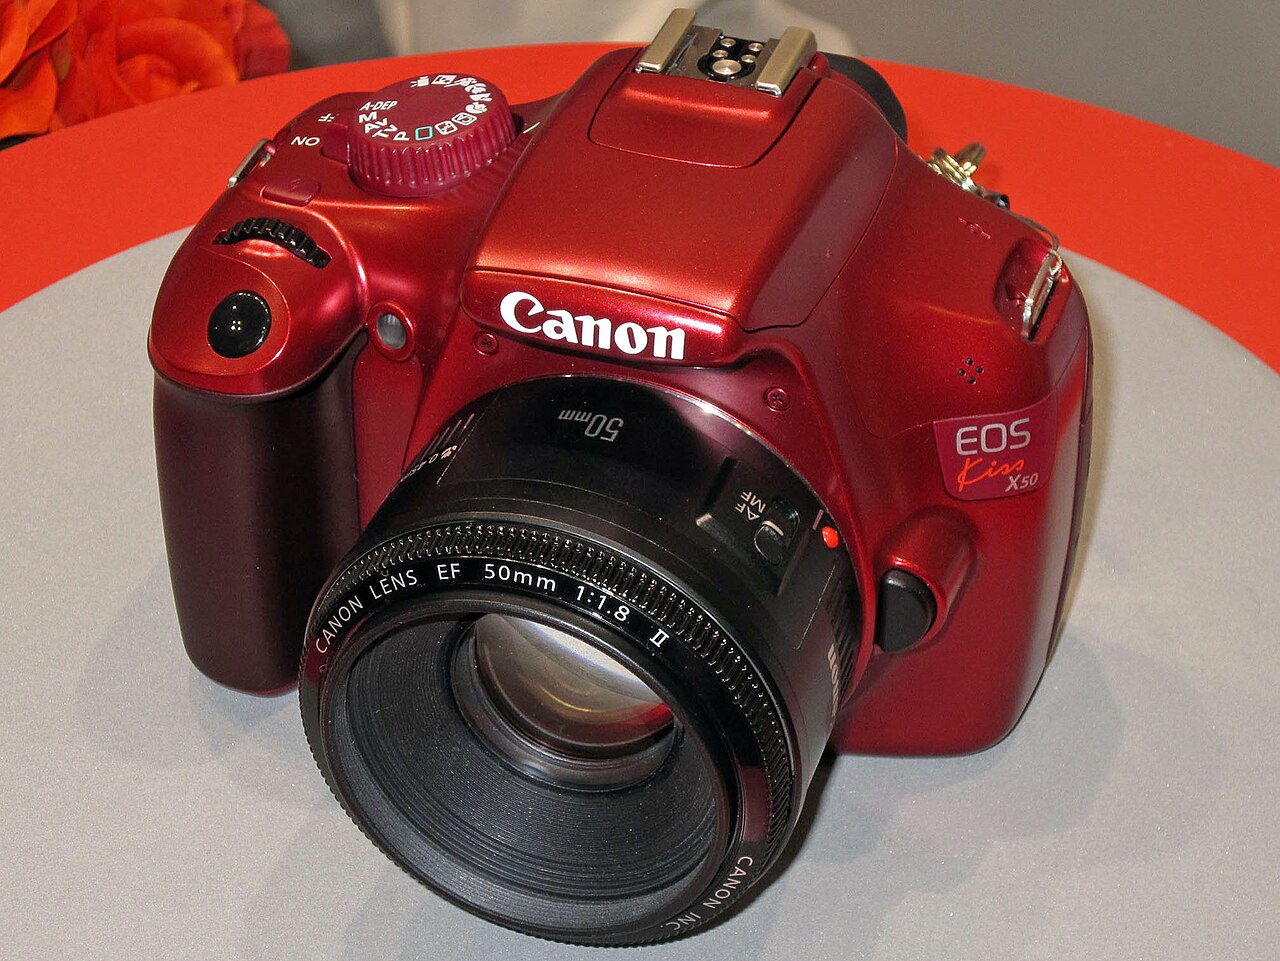 File:Canon EOS Kiss X50 red.jpg - Wikimedia Commons